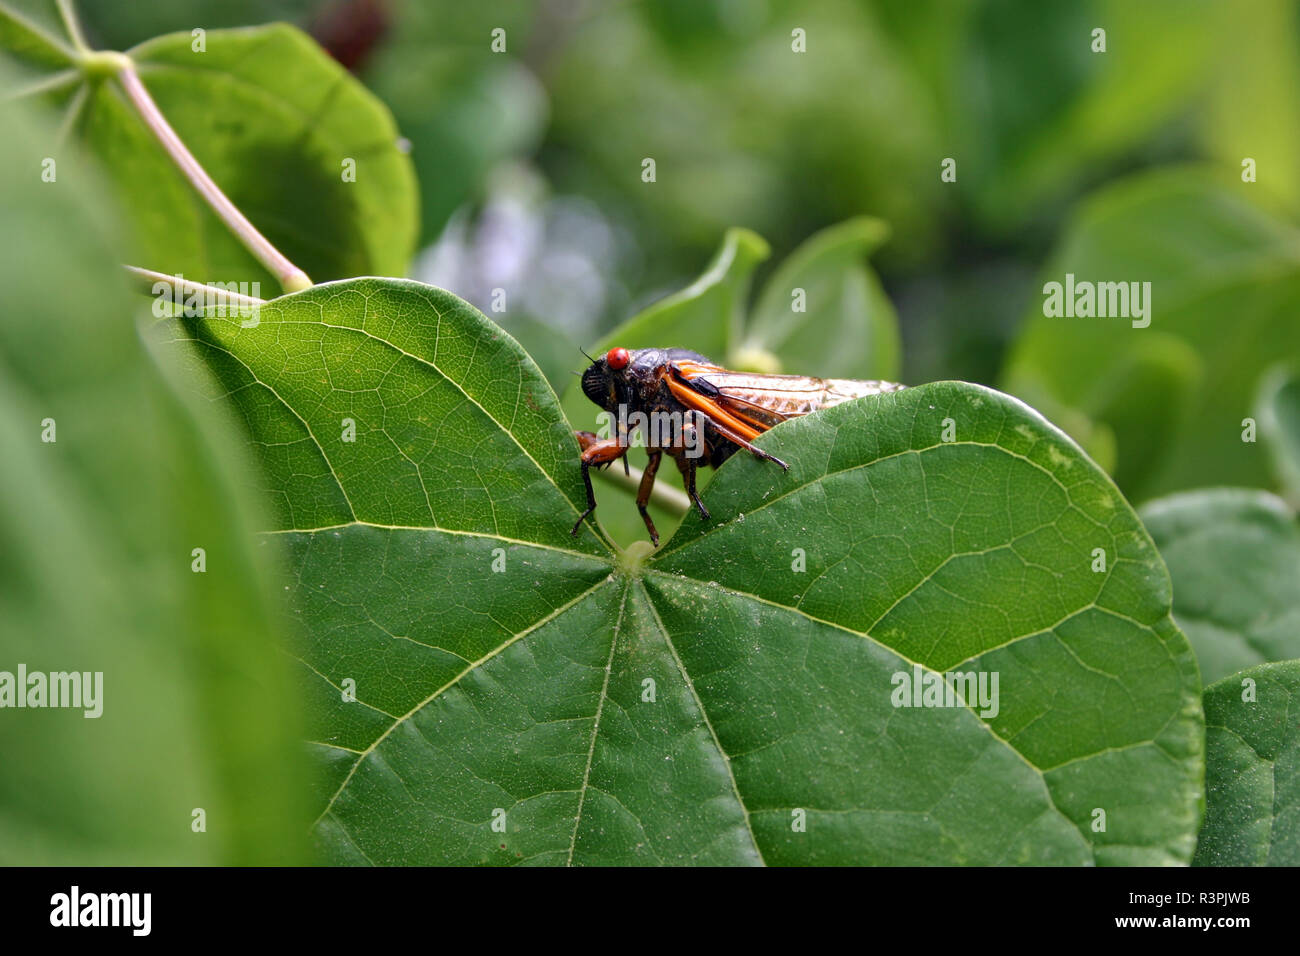 A colorful, 17 year, adult cicada hanging out in a forest of leaves Stock Photo